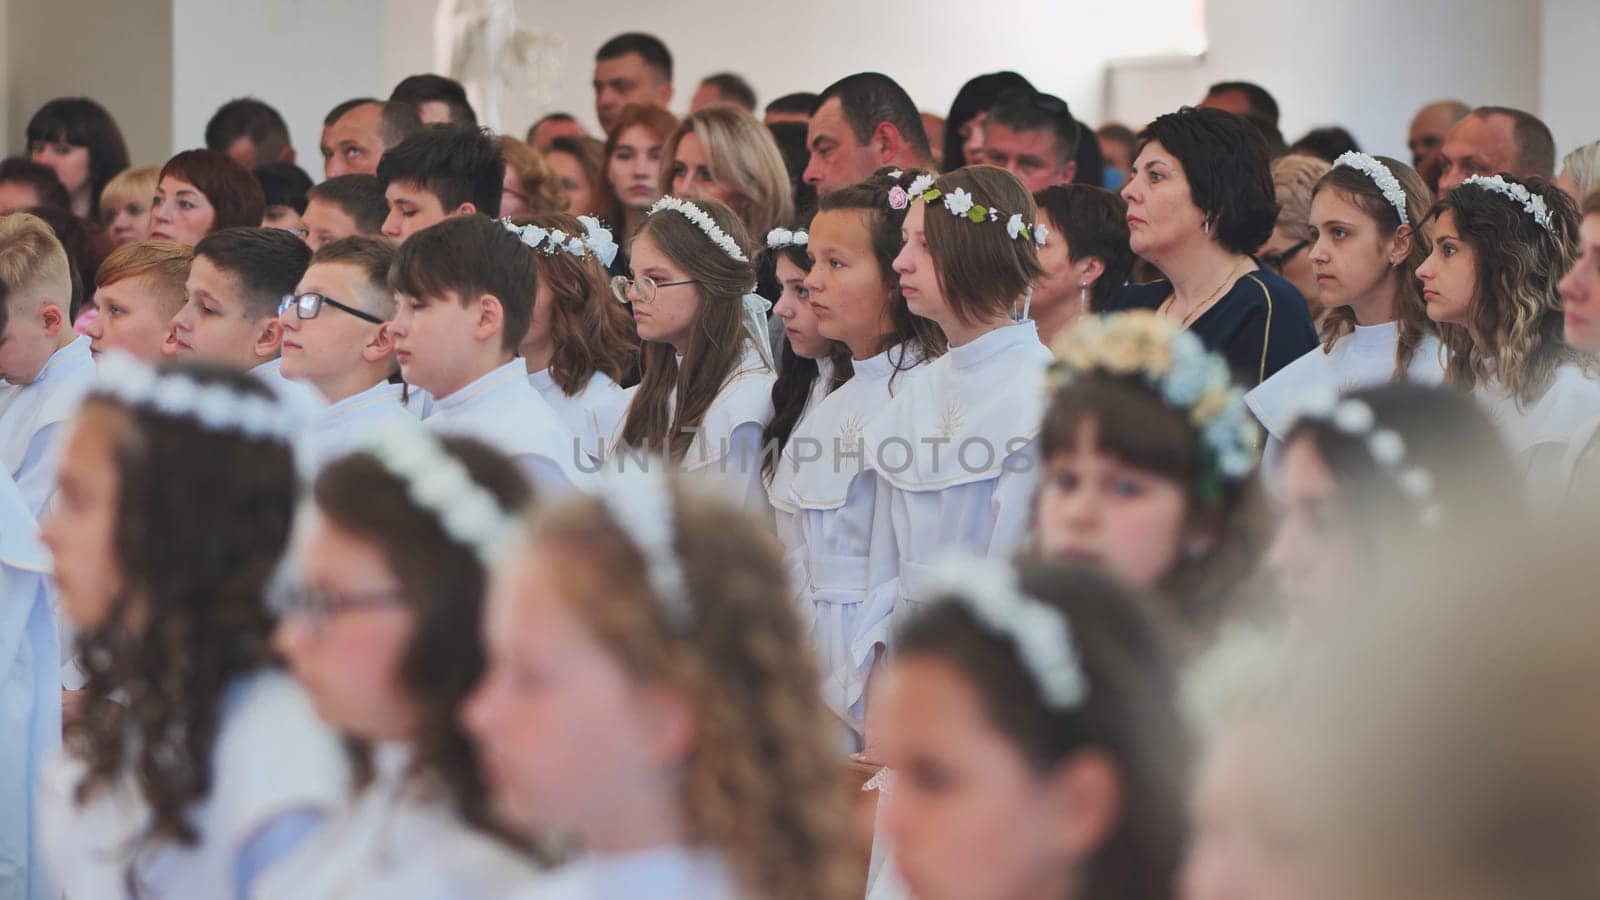 Lida, Belarus - May 31, 2022: Children in a Catholic church during their first communion. by DovidPro